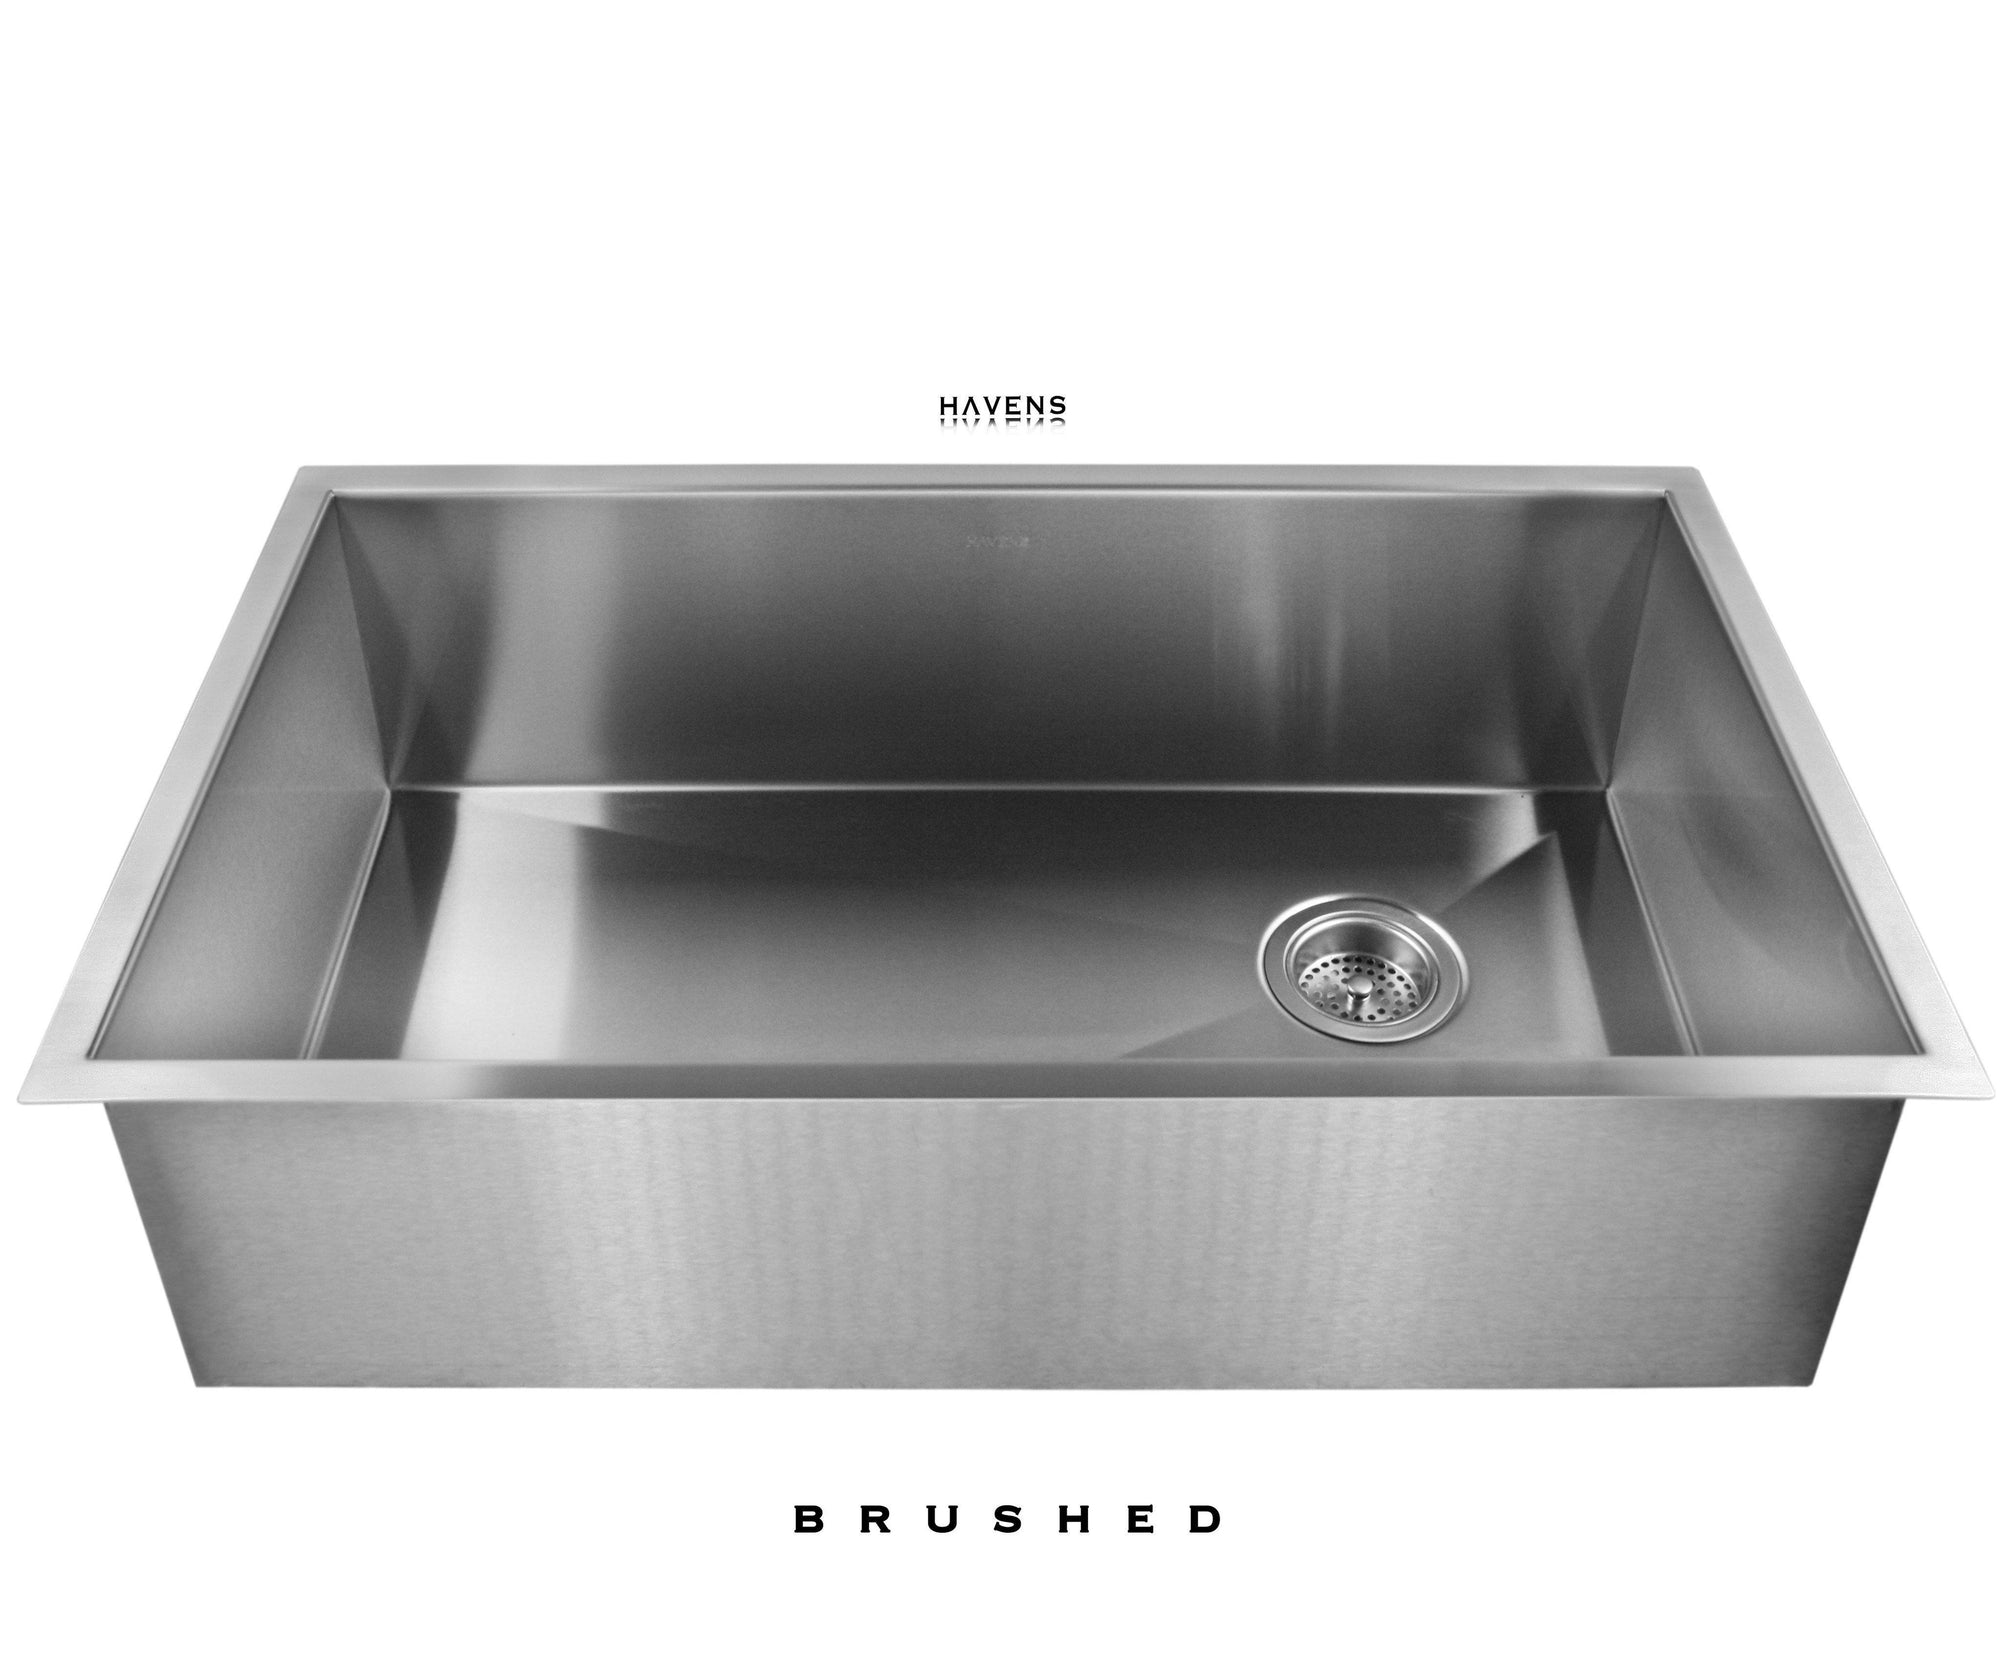 Undermount stainless steel kitchen sink with the signature brushed finish by Havens.